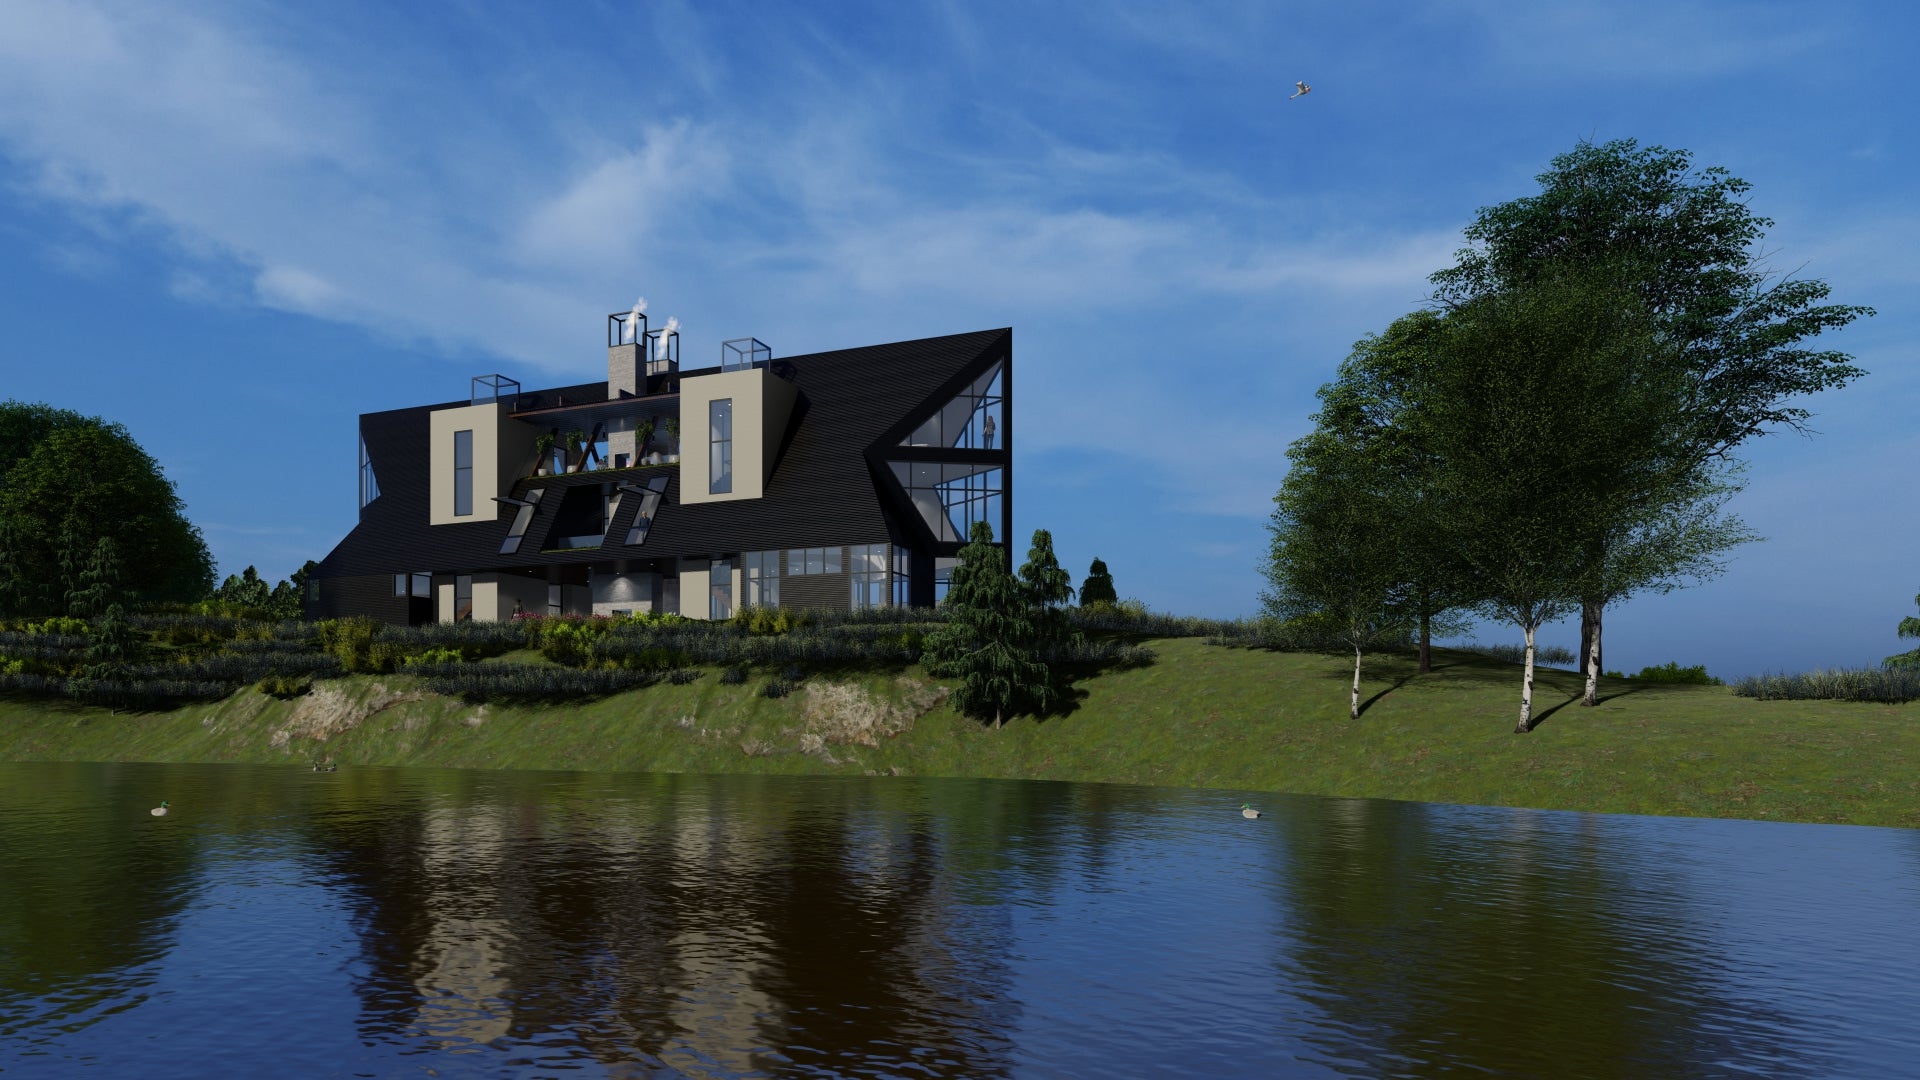 Loon House on the lake, designed by Akar Architectture.